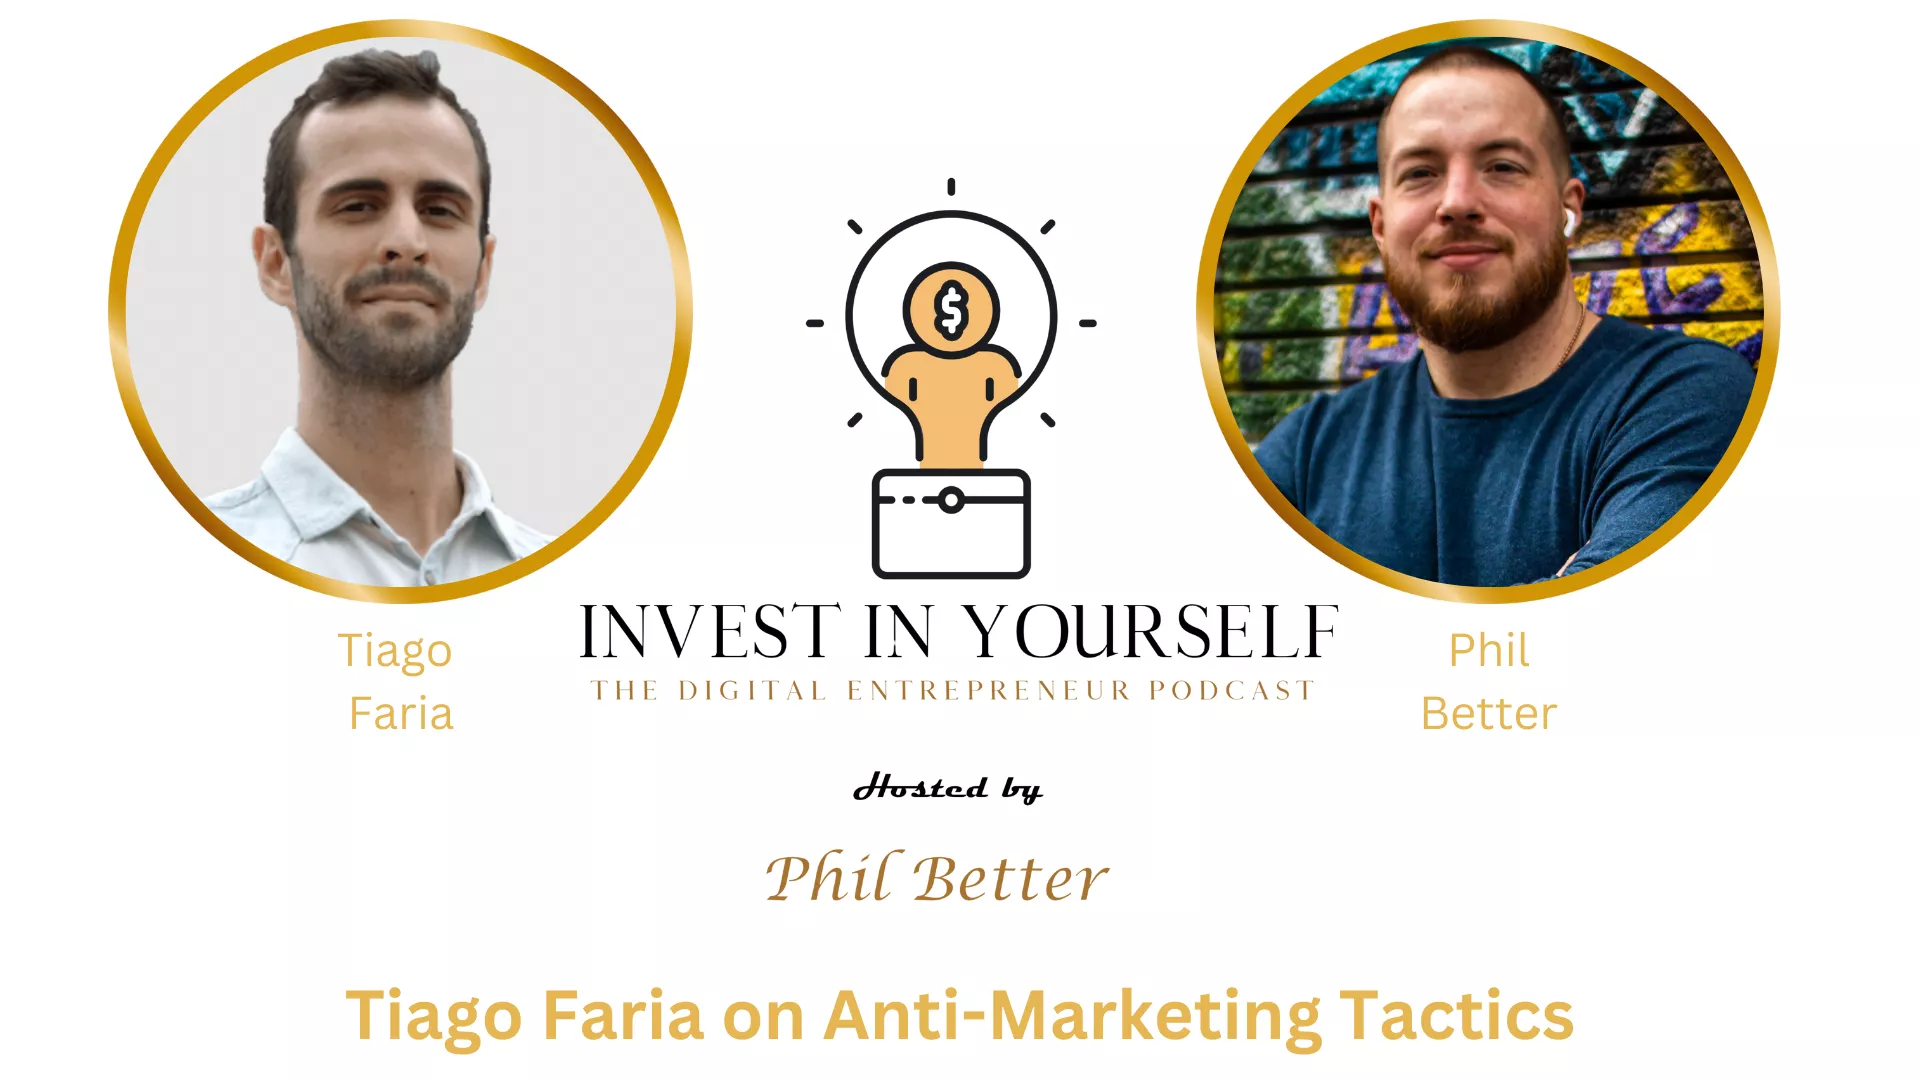 Promotional graphic for 'invest in yourself - the entrepreneurial voyage podcast' featuring host Phil Better and guest Tiago Faria discussing anti-marketing tactics.